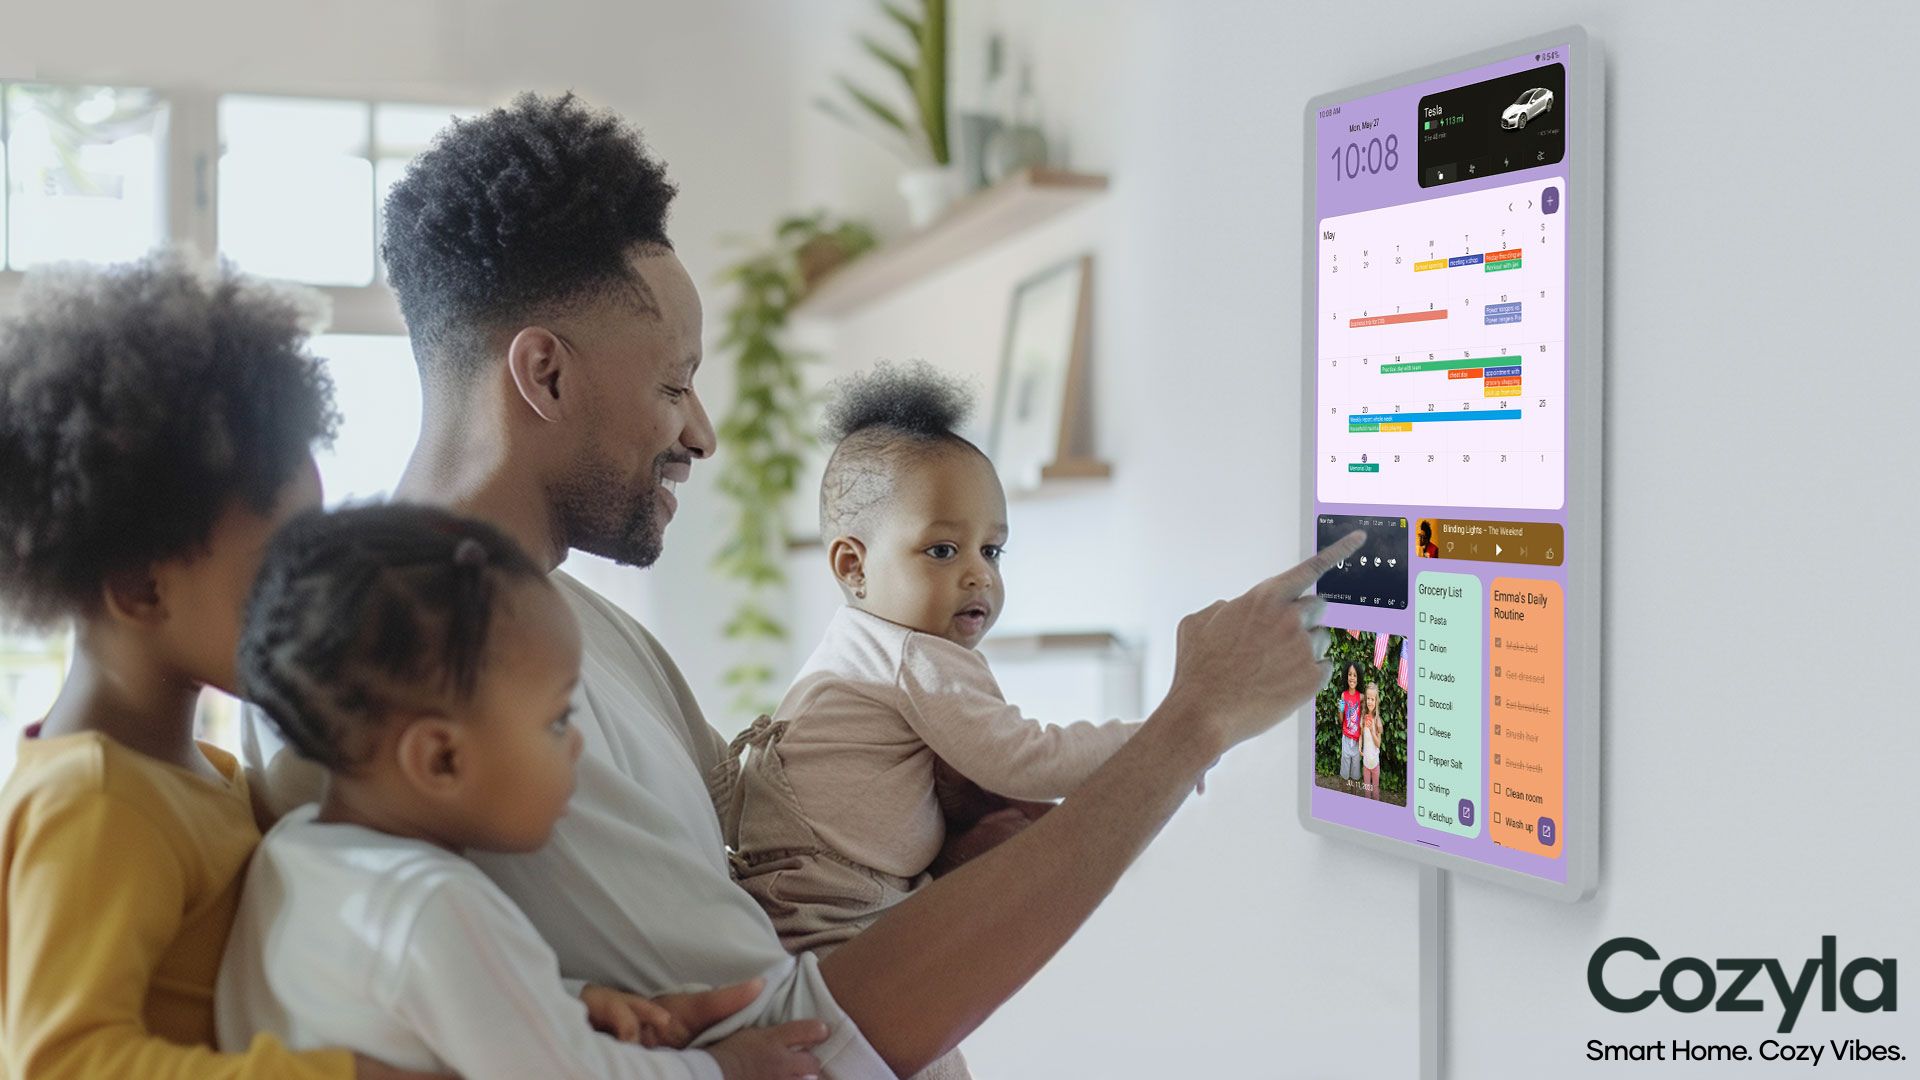 Cozyla Launches 32" Smart Digital Calendar that Rivals Skylight and Hearth Displays 